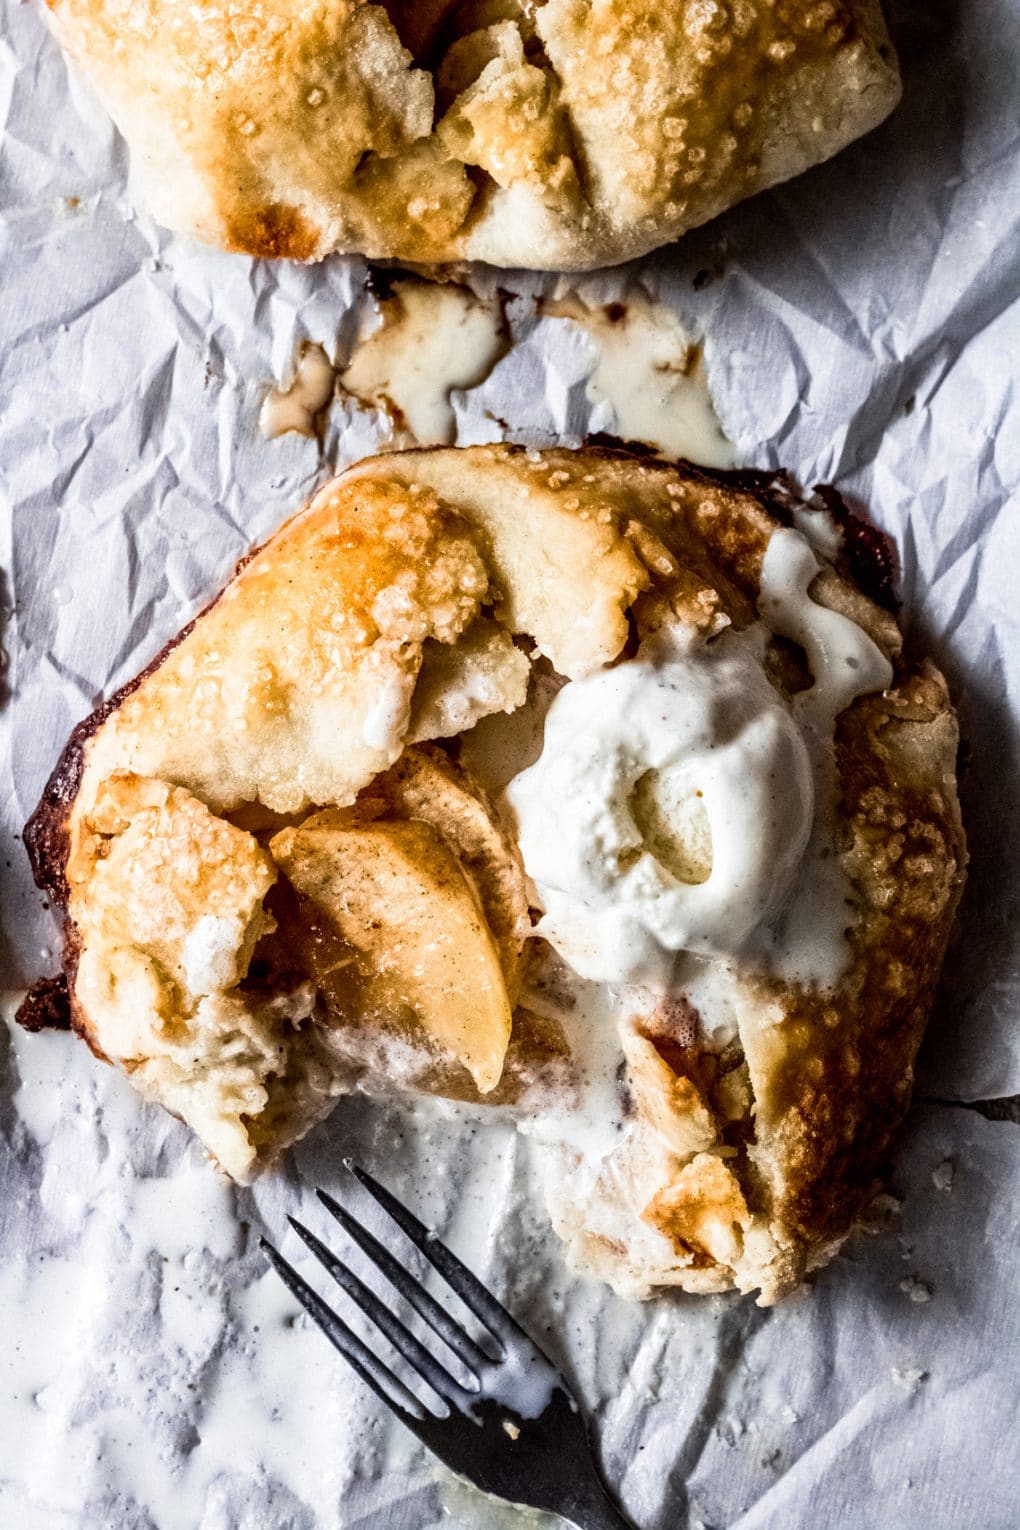 a gluten-free mini apple galette with vanilla ice cream. there's a fork and a bite taken out